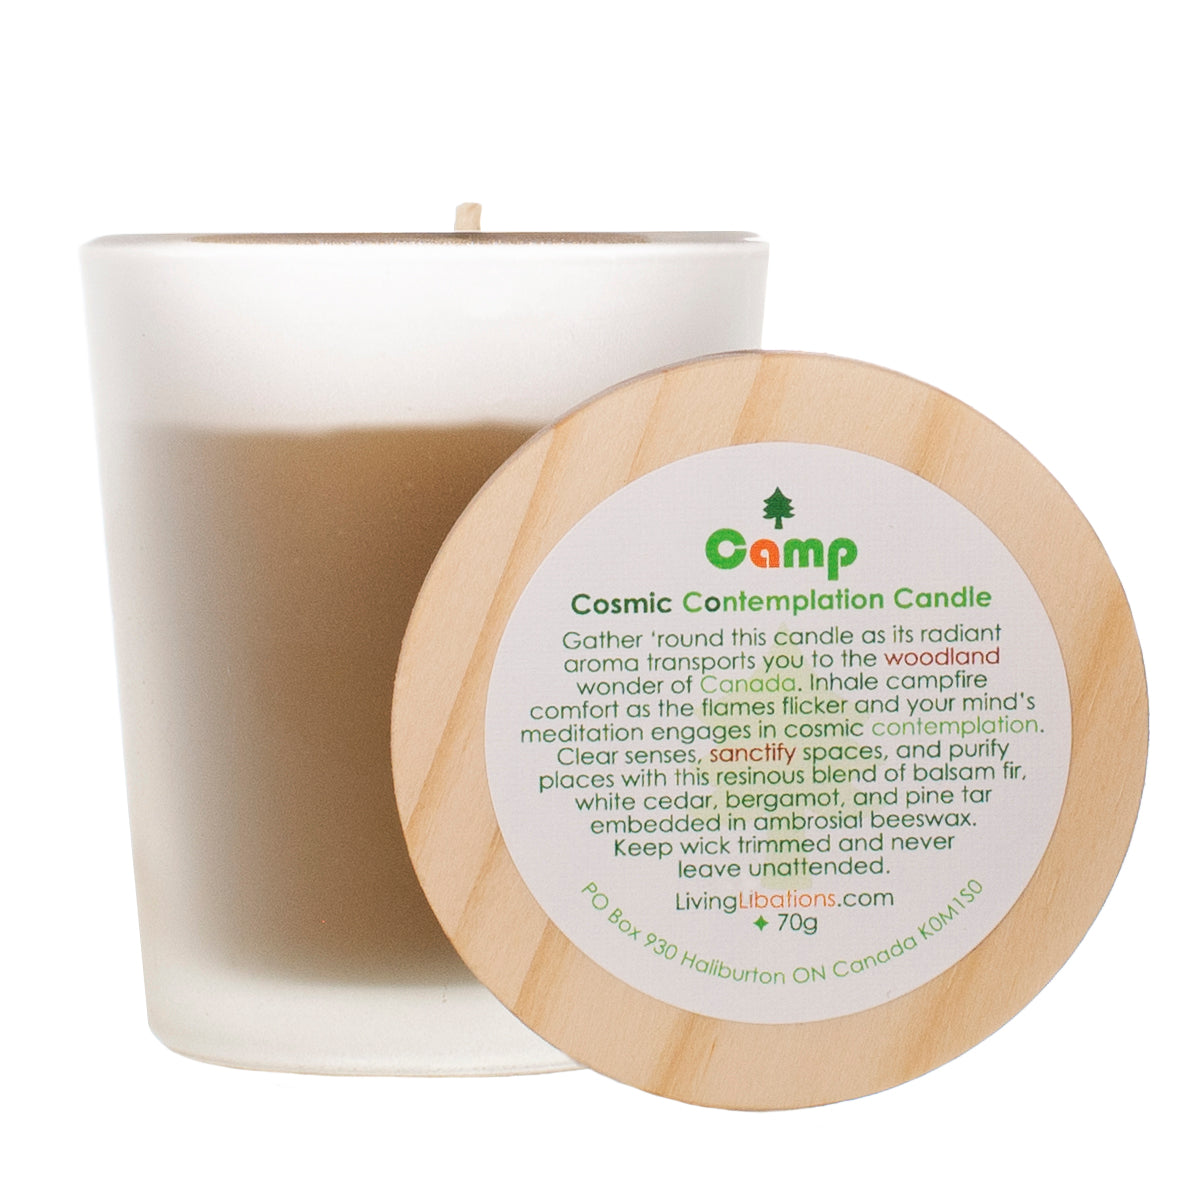 Camp Cosmic Contemplation Candle